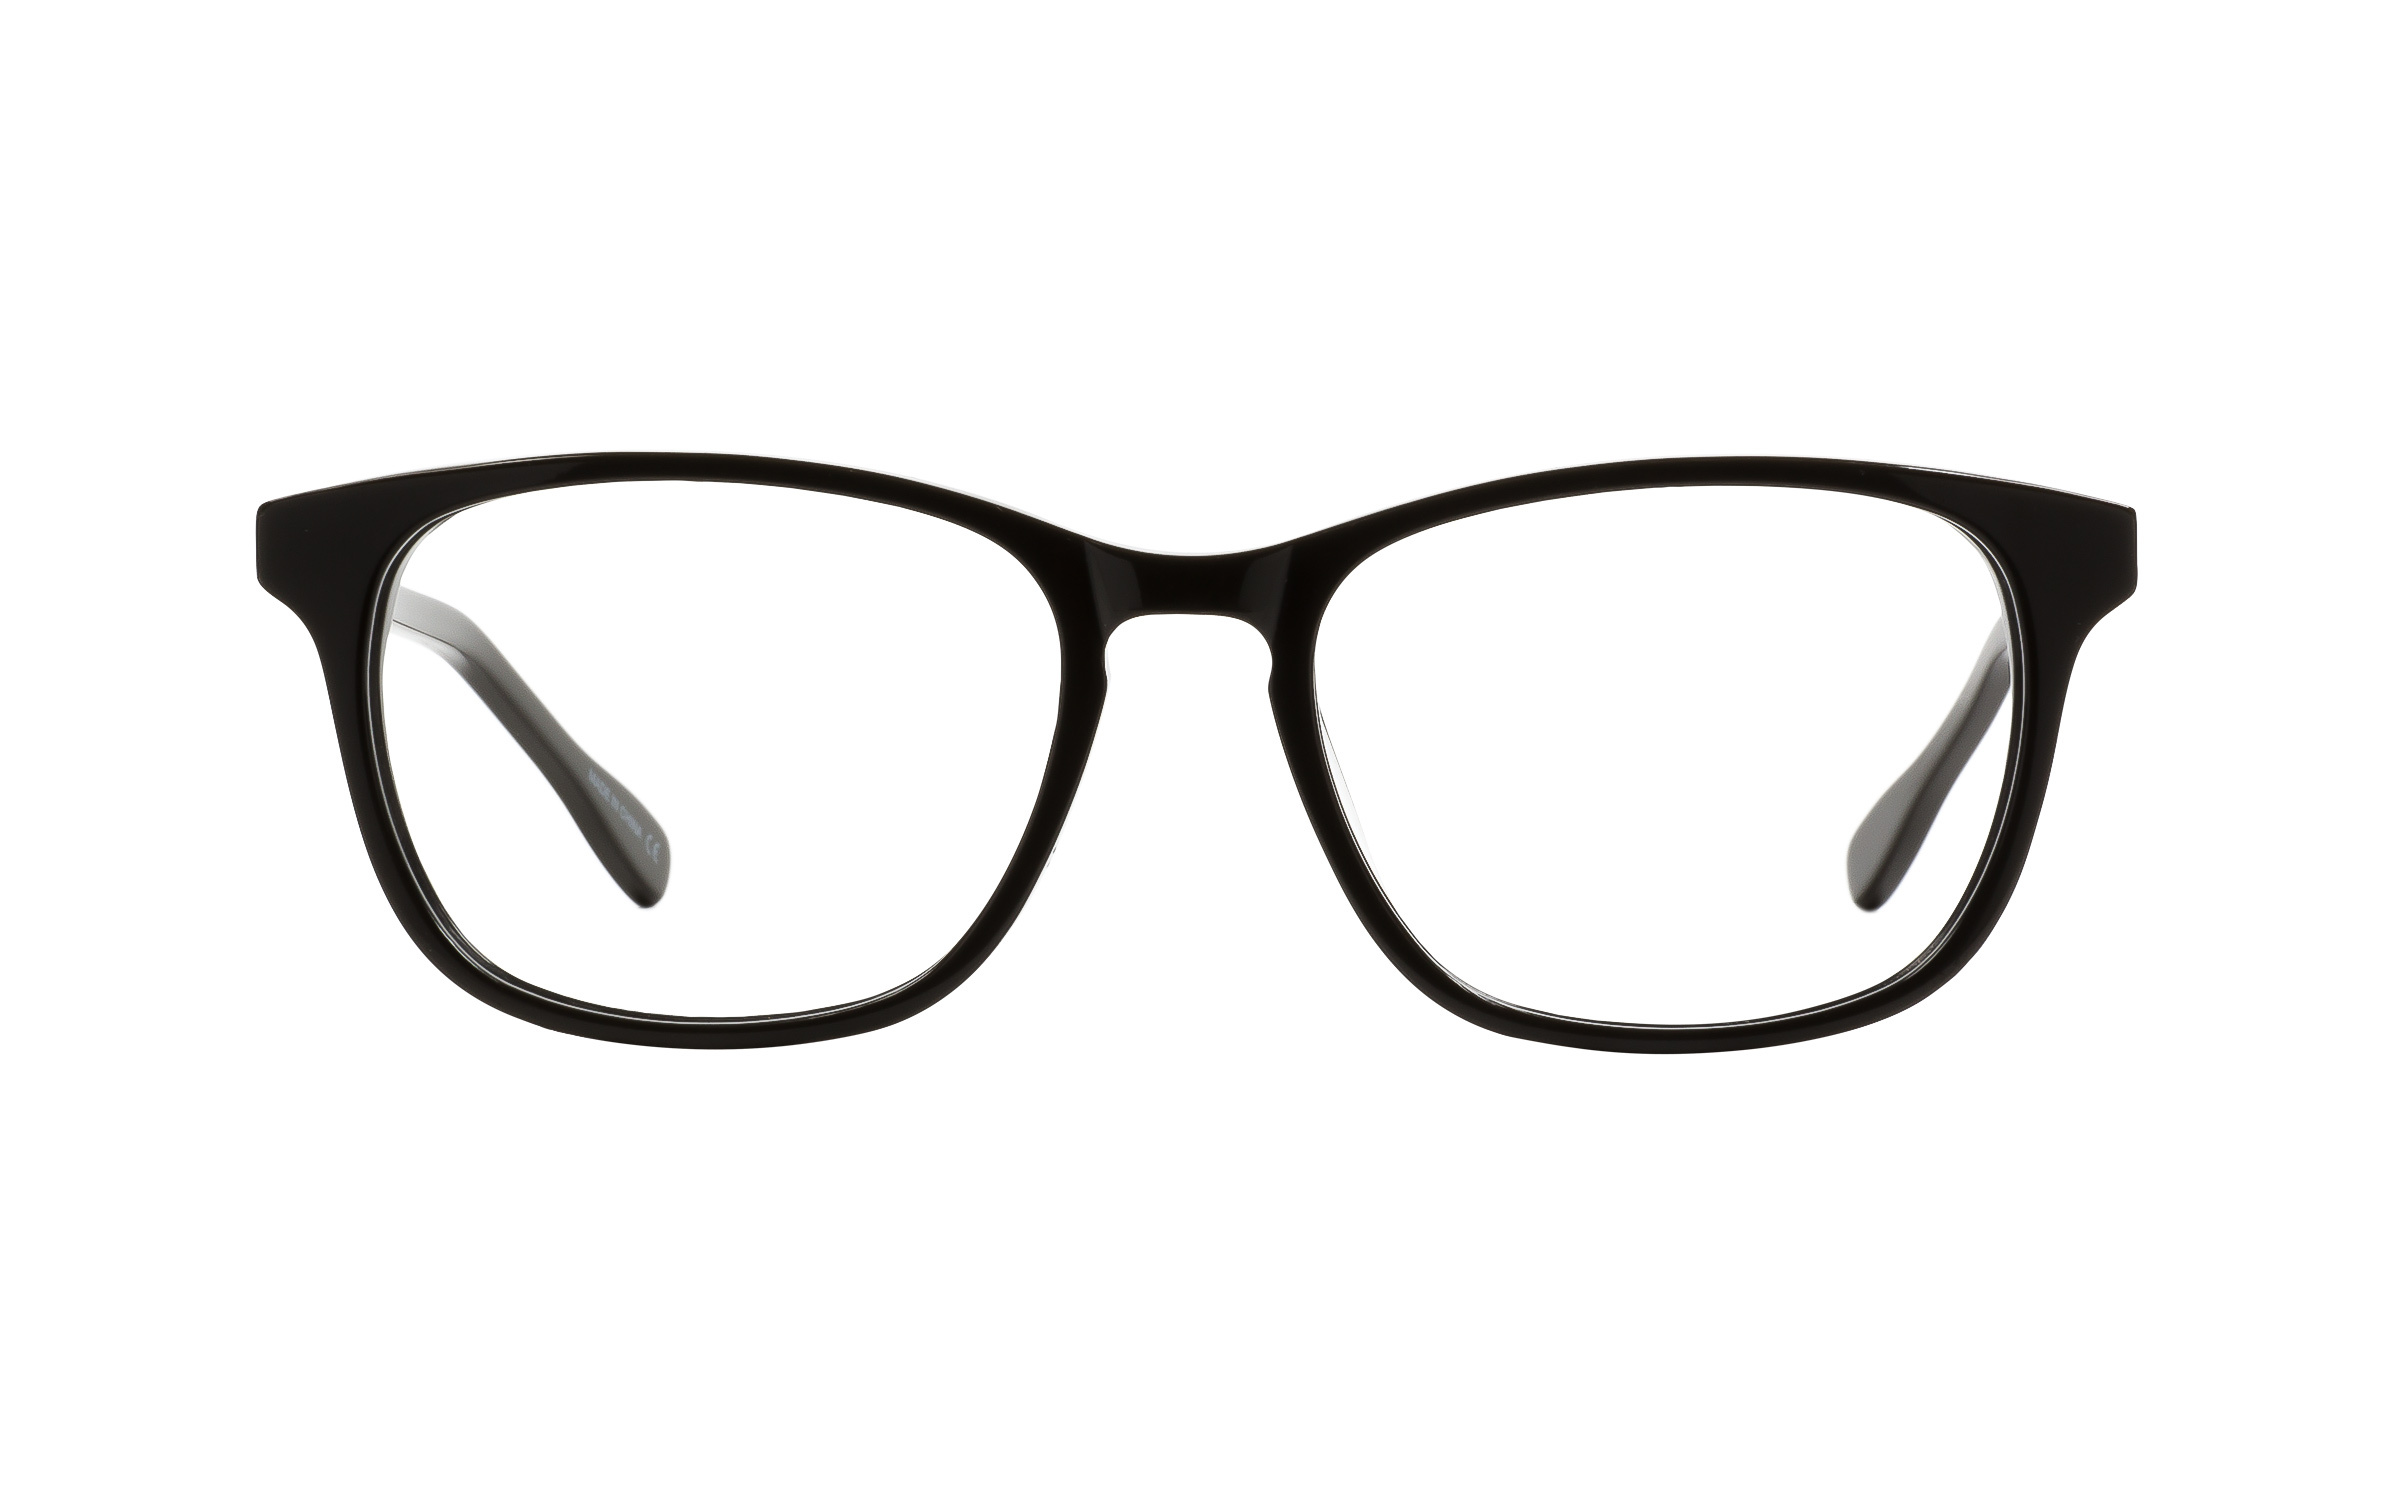 These smooth subtly rounded D-frame glasses from 7 For All Mankind are a good match for broad foreheads tapered jaws and soft features. A slight keyhole bridge suits shorter wider noses while slim frame arms come equipped with flexible spring hinges to fit small and medium faces.